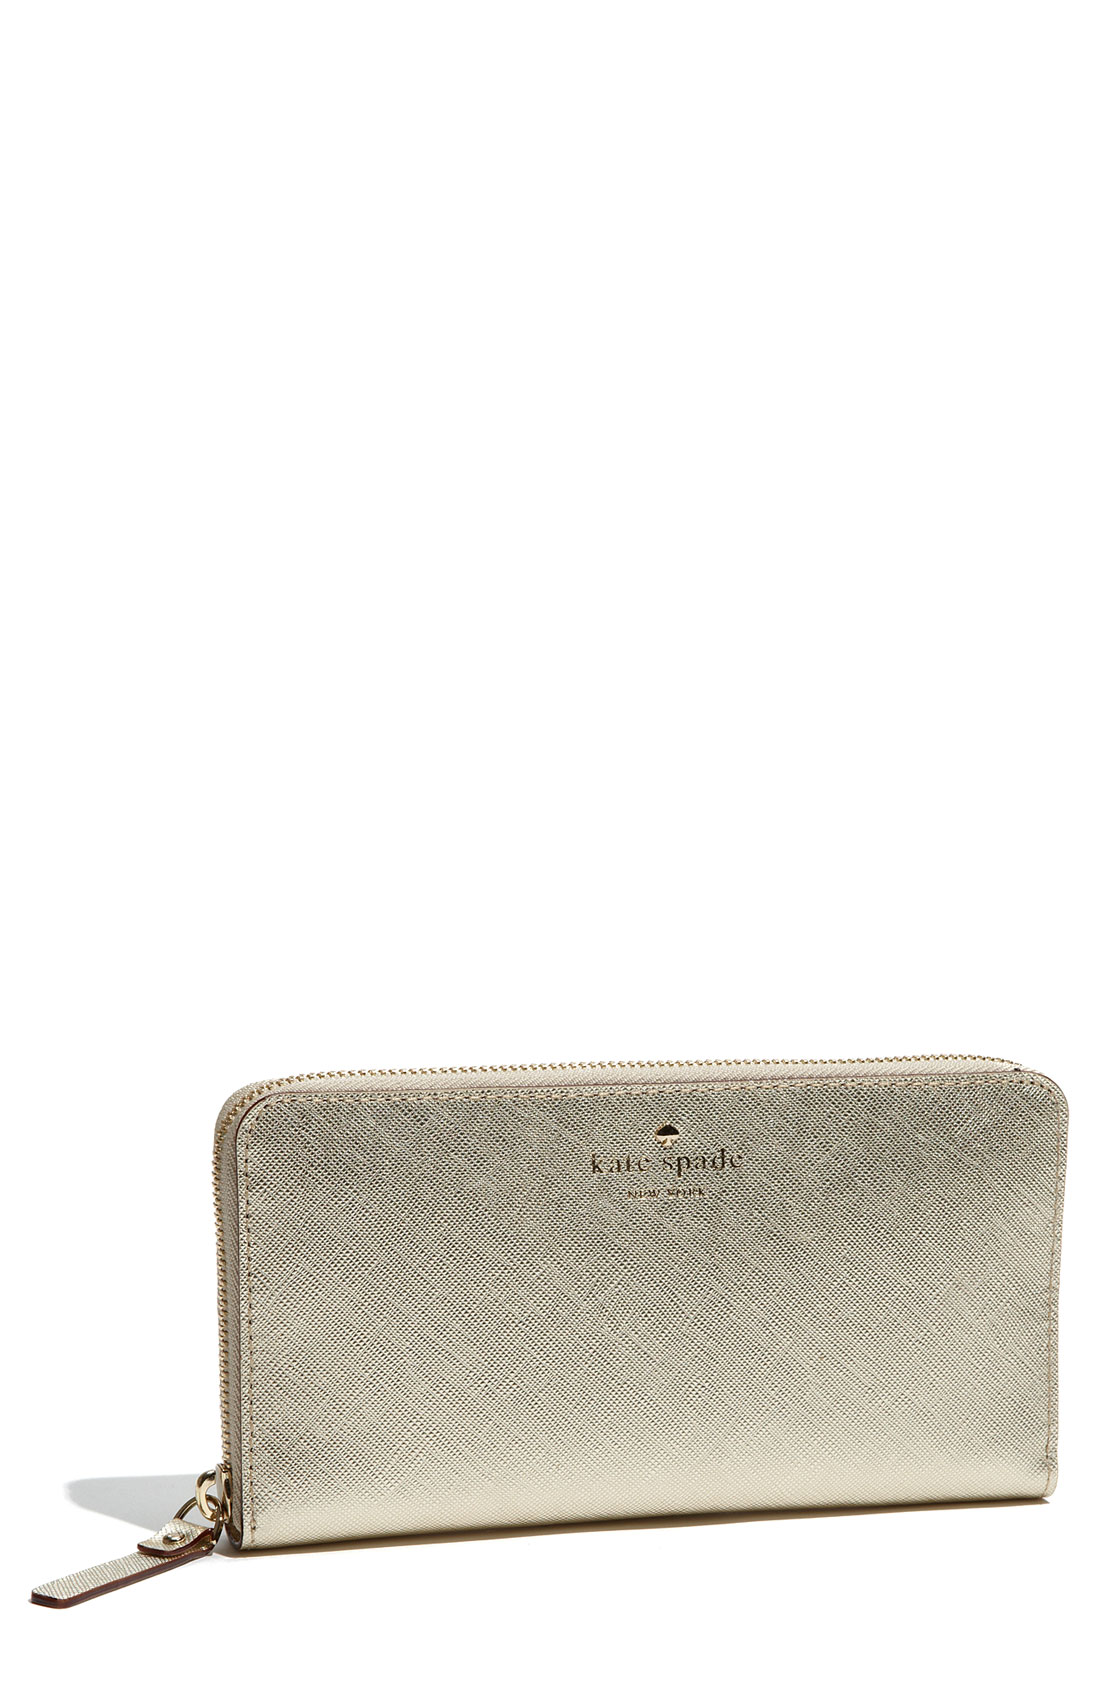 Kate Spade New York Mikas Pond Lacey Wallet in Gold | Lyst